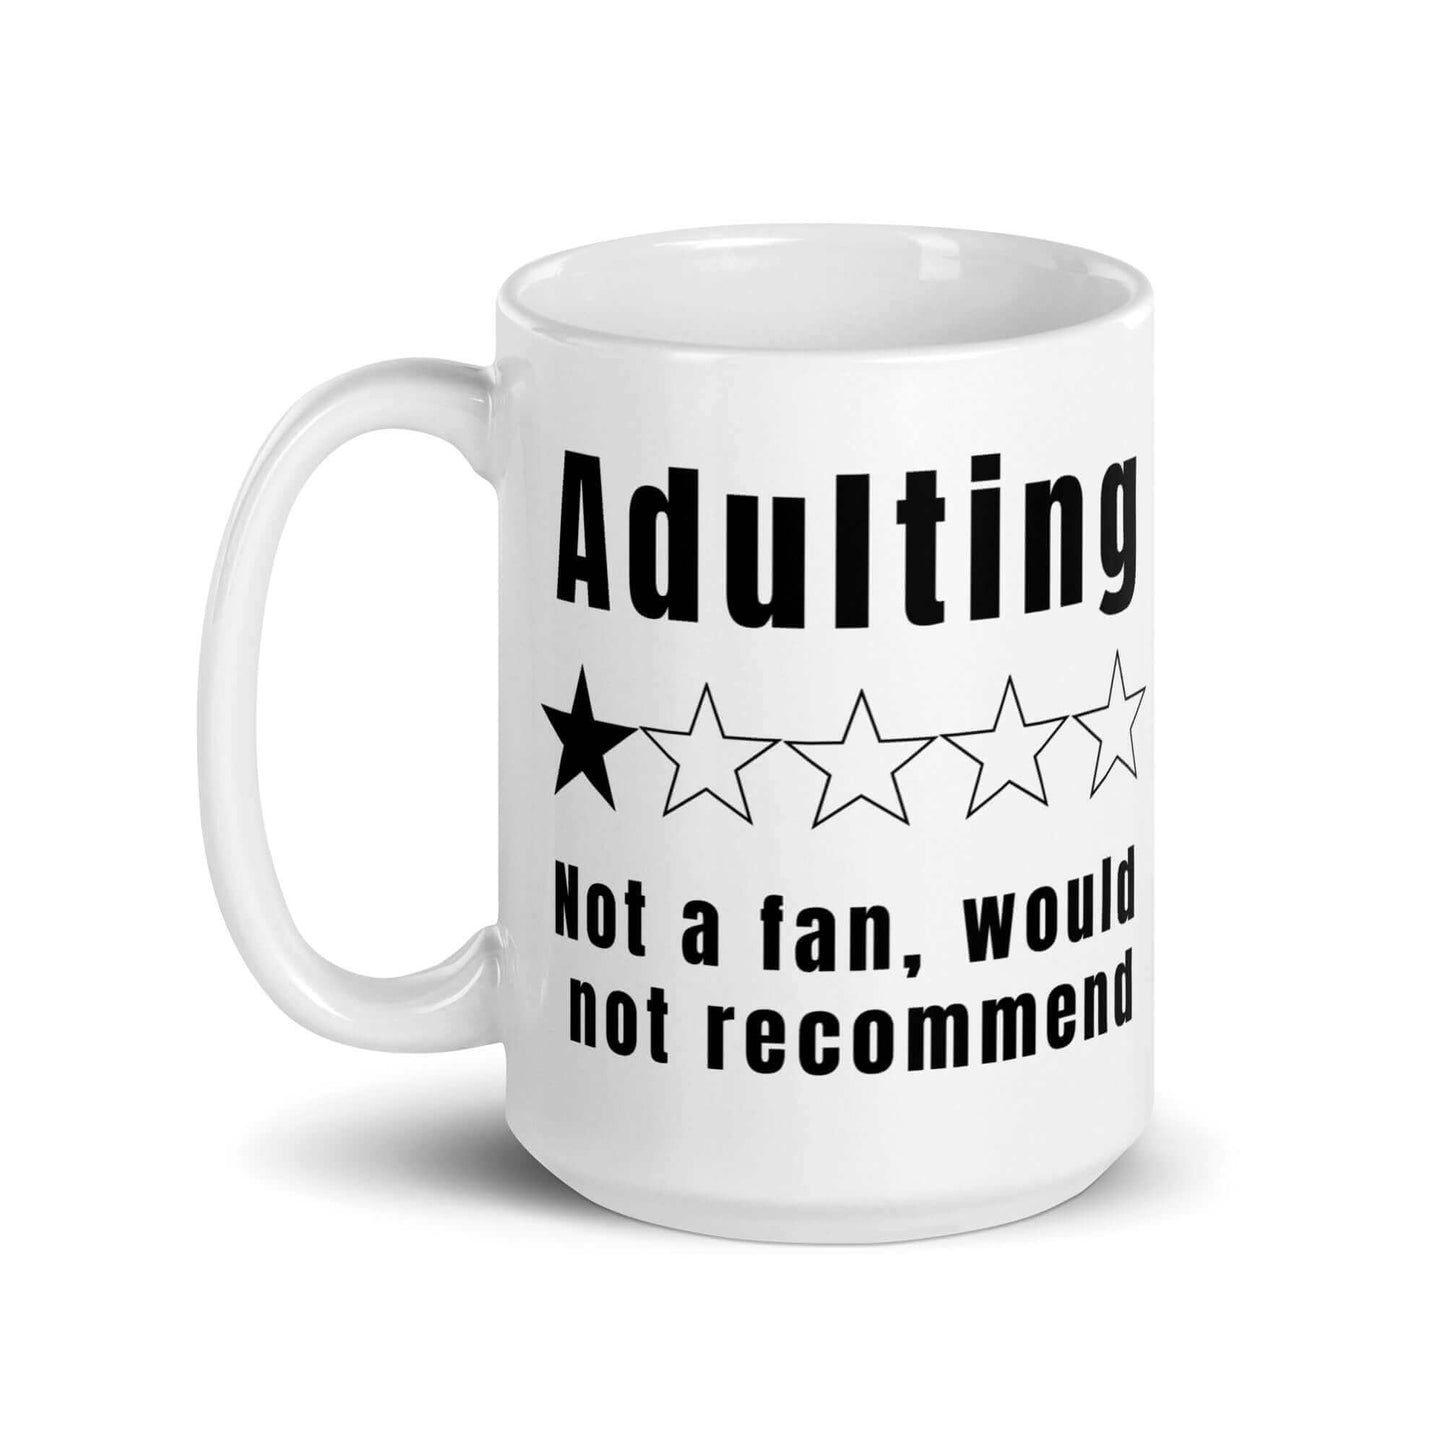 Adulting - Not a fan would not recommend - White glossy mug adult adult mug adulting coffee mug funny mug grown up not a fan